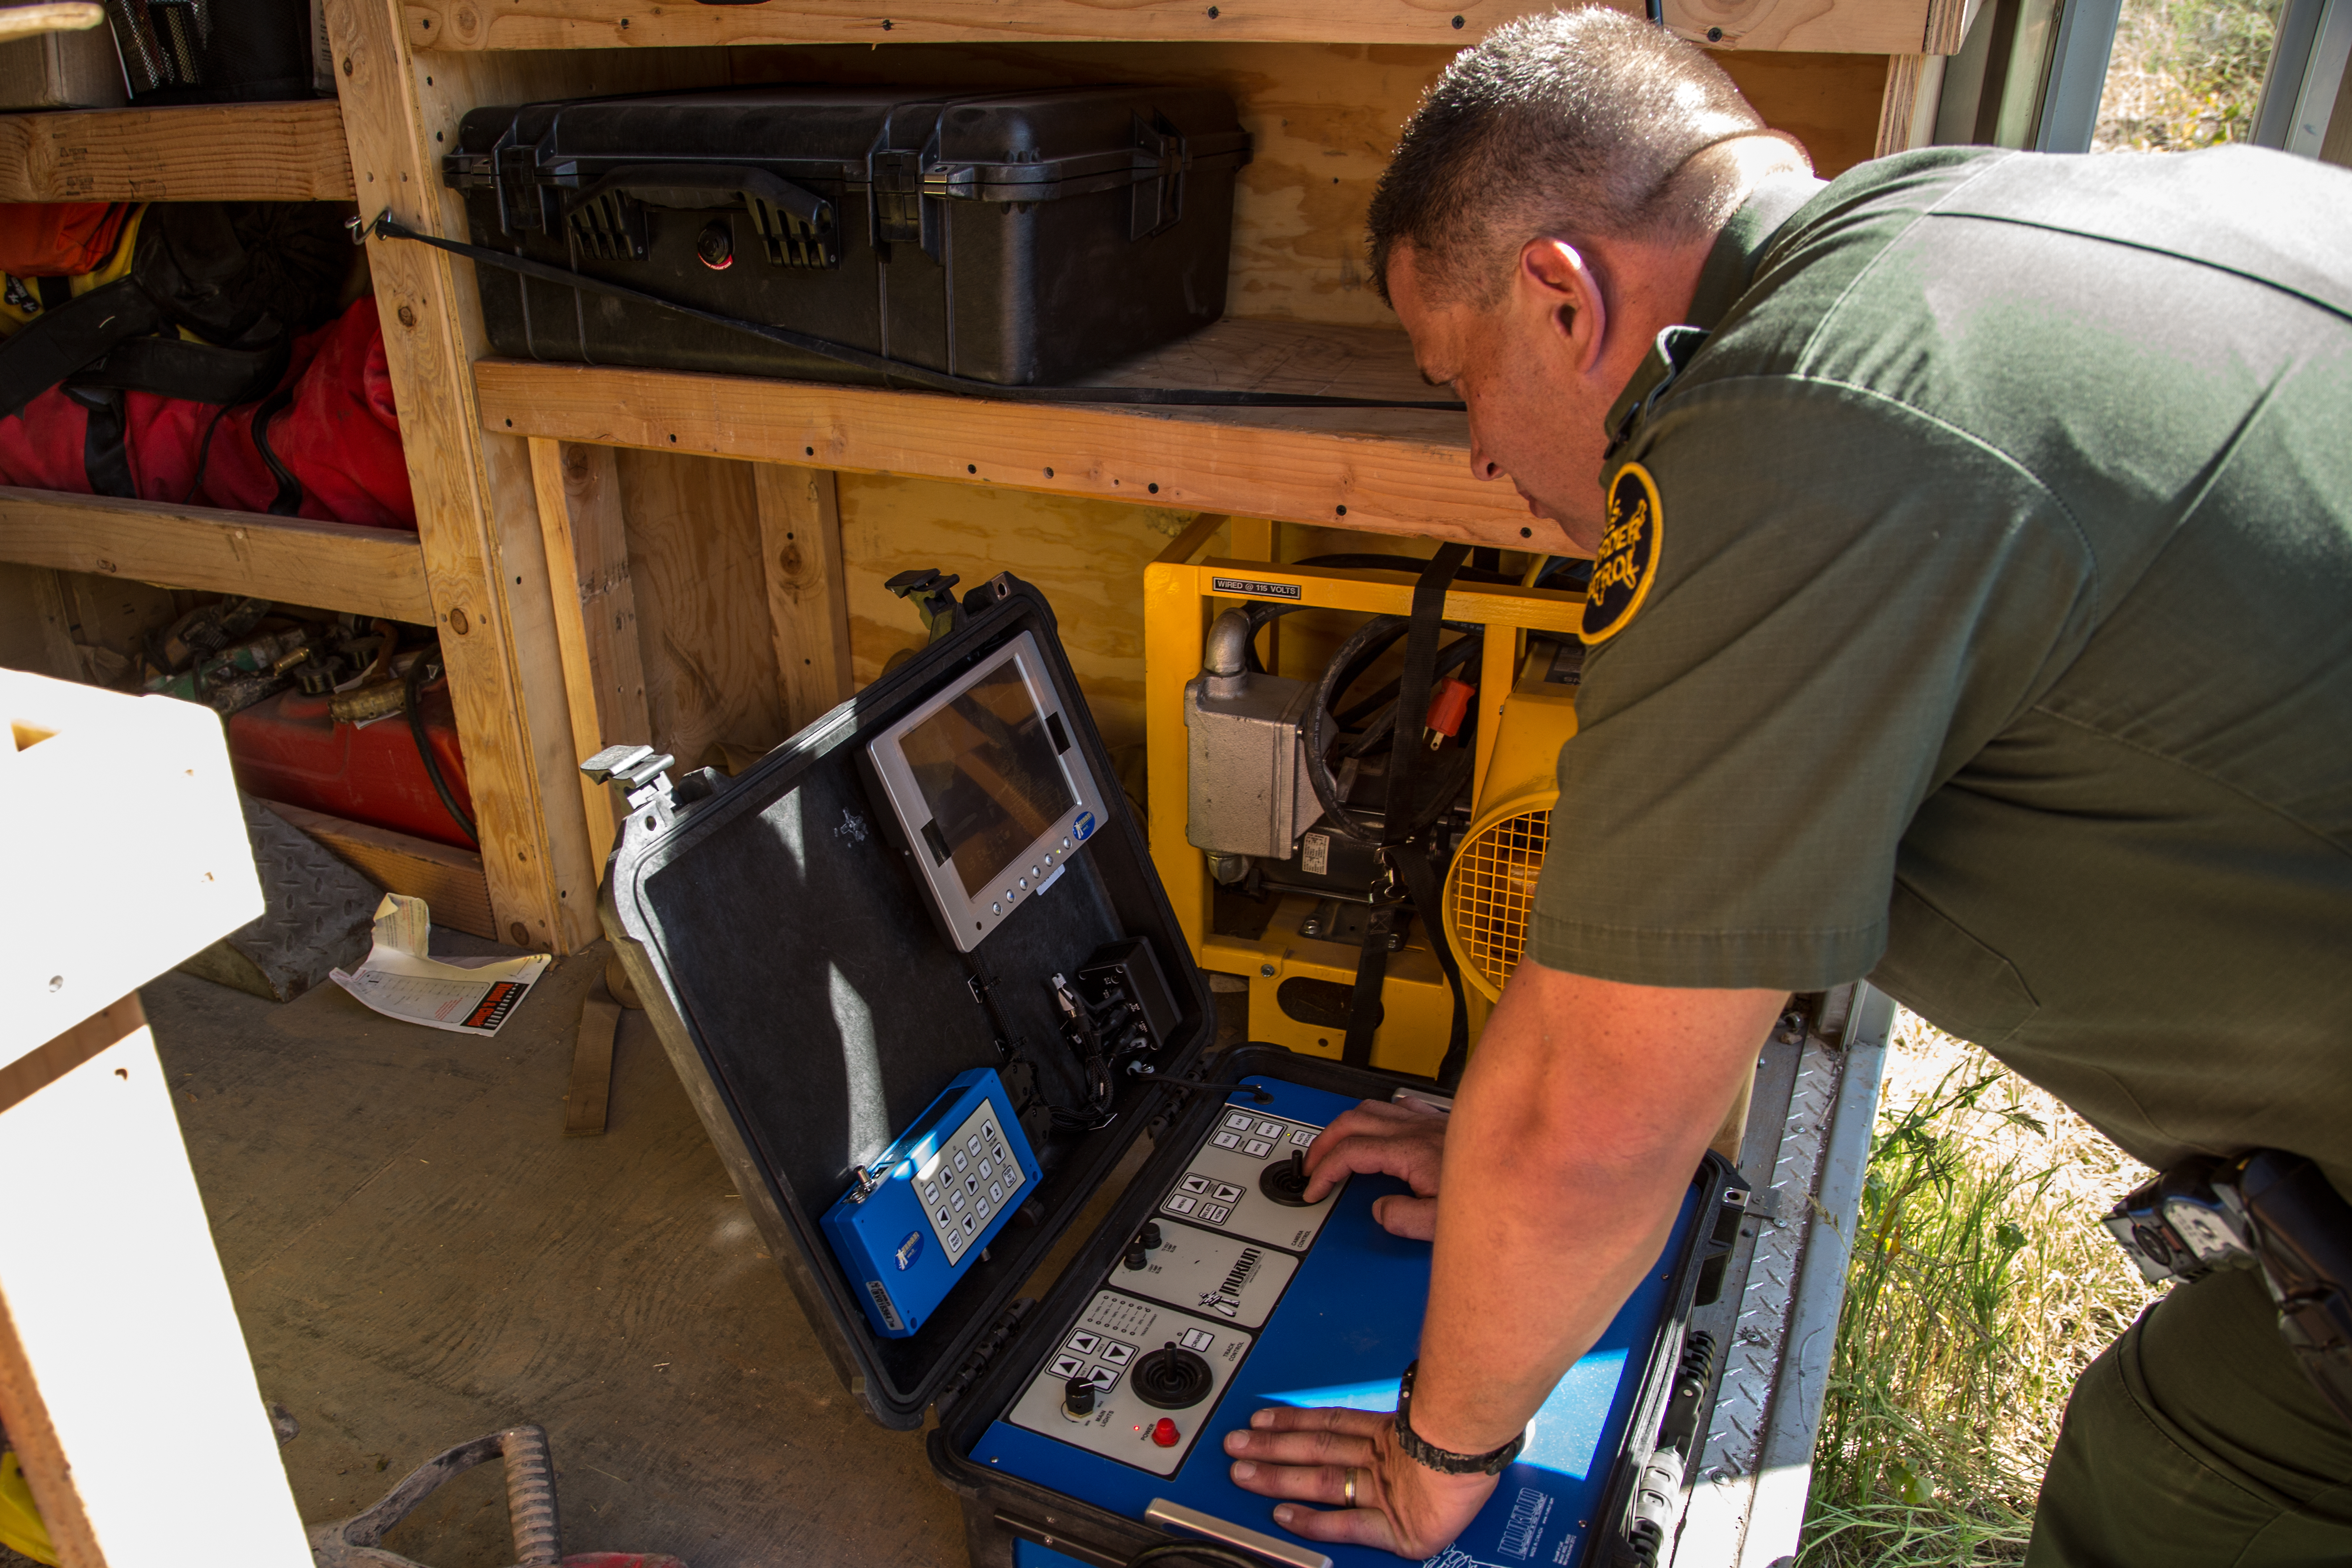 A Border Patrol agent prepares the robot's control console prior to deployment.